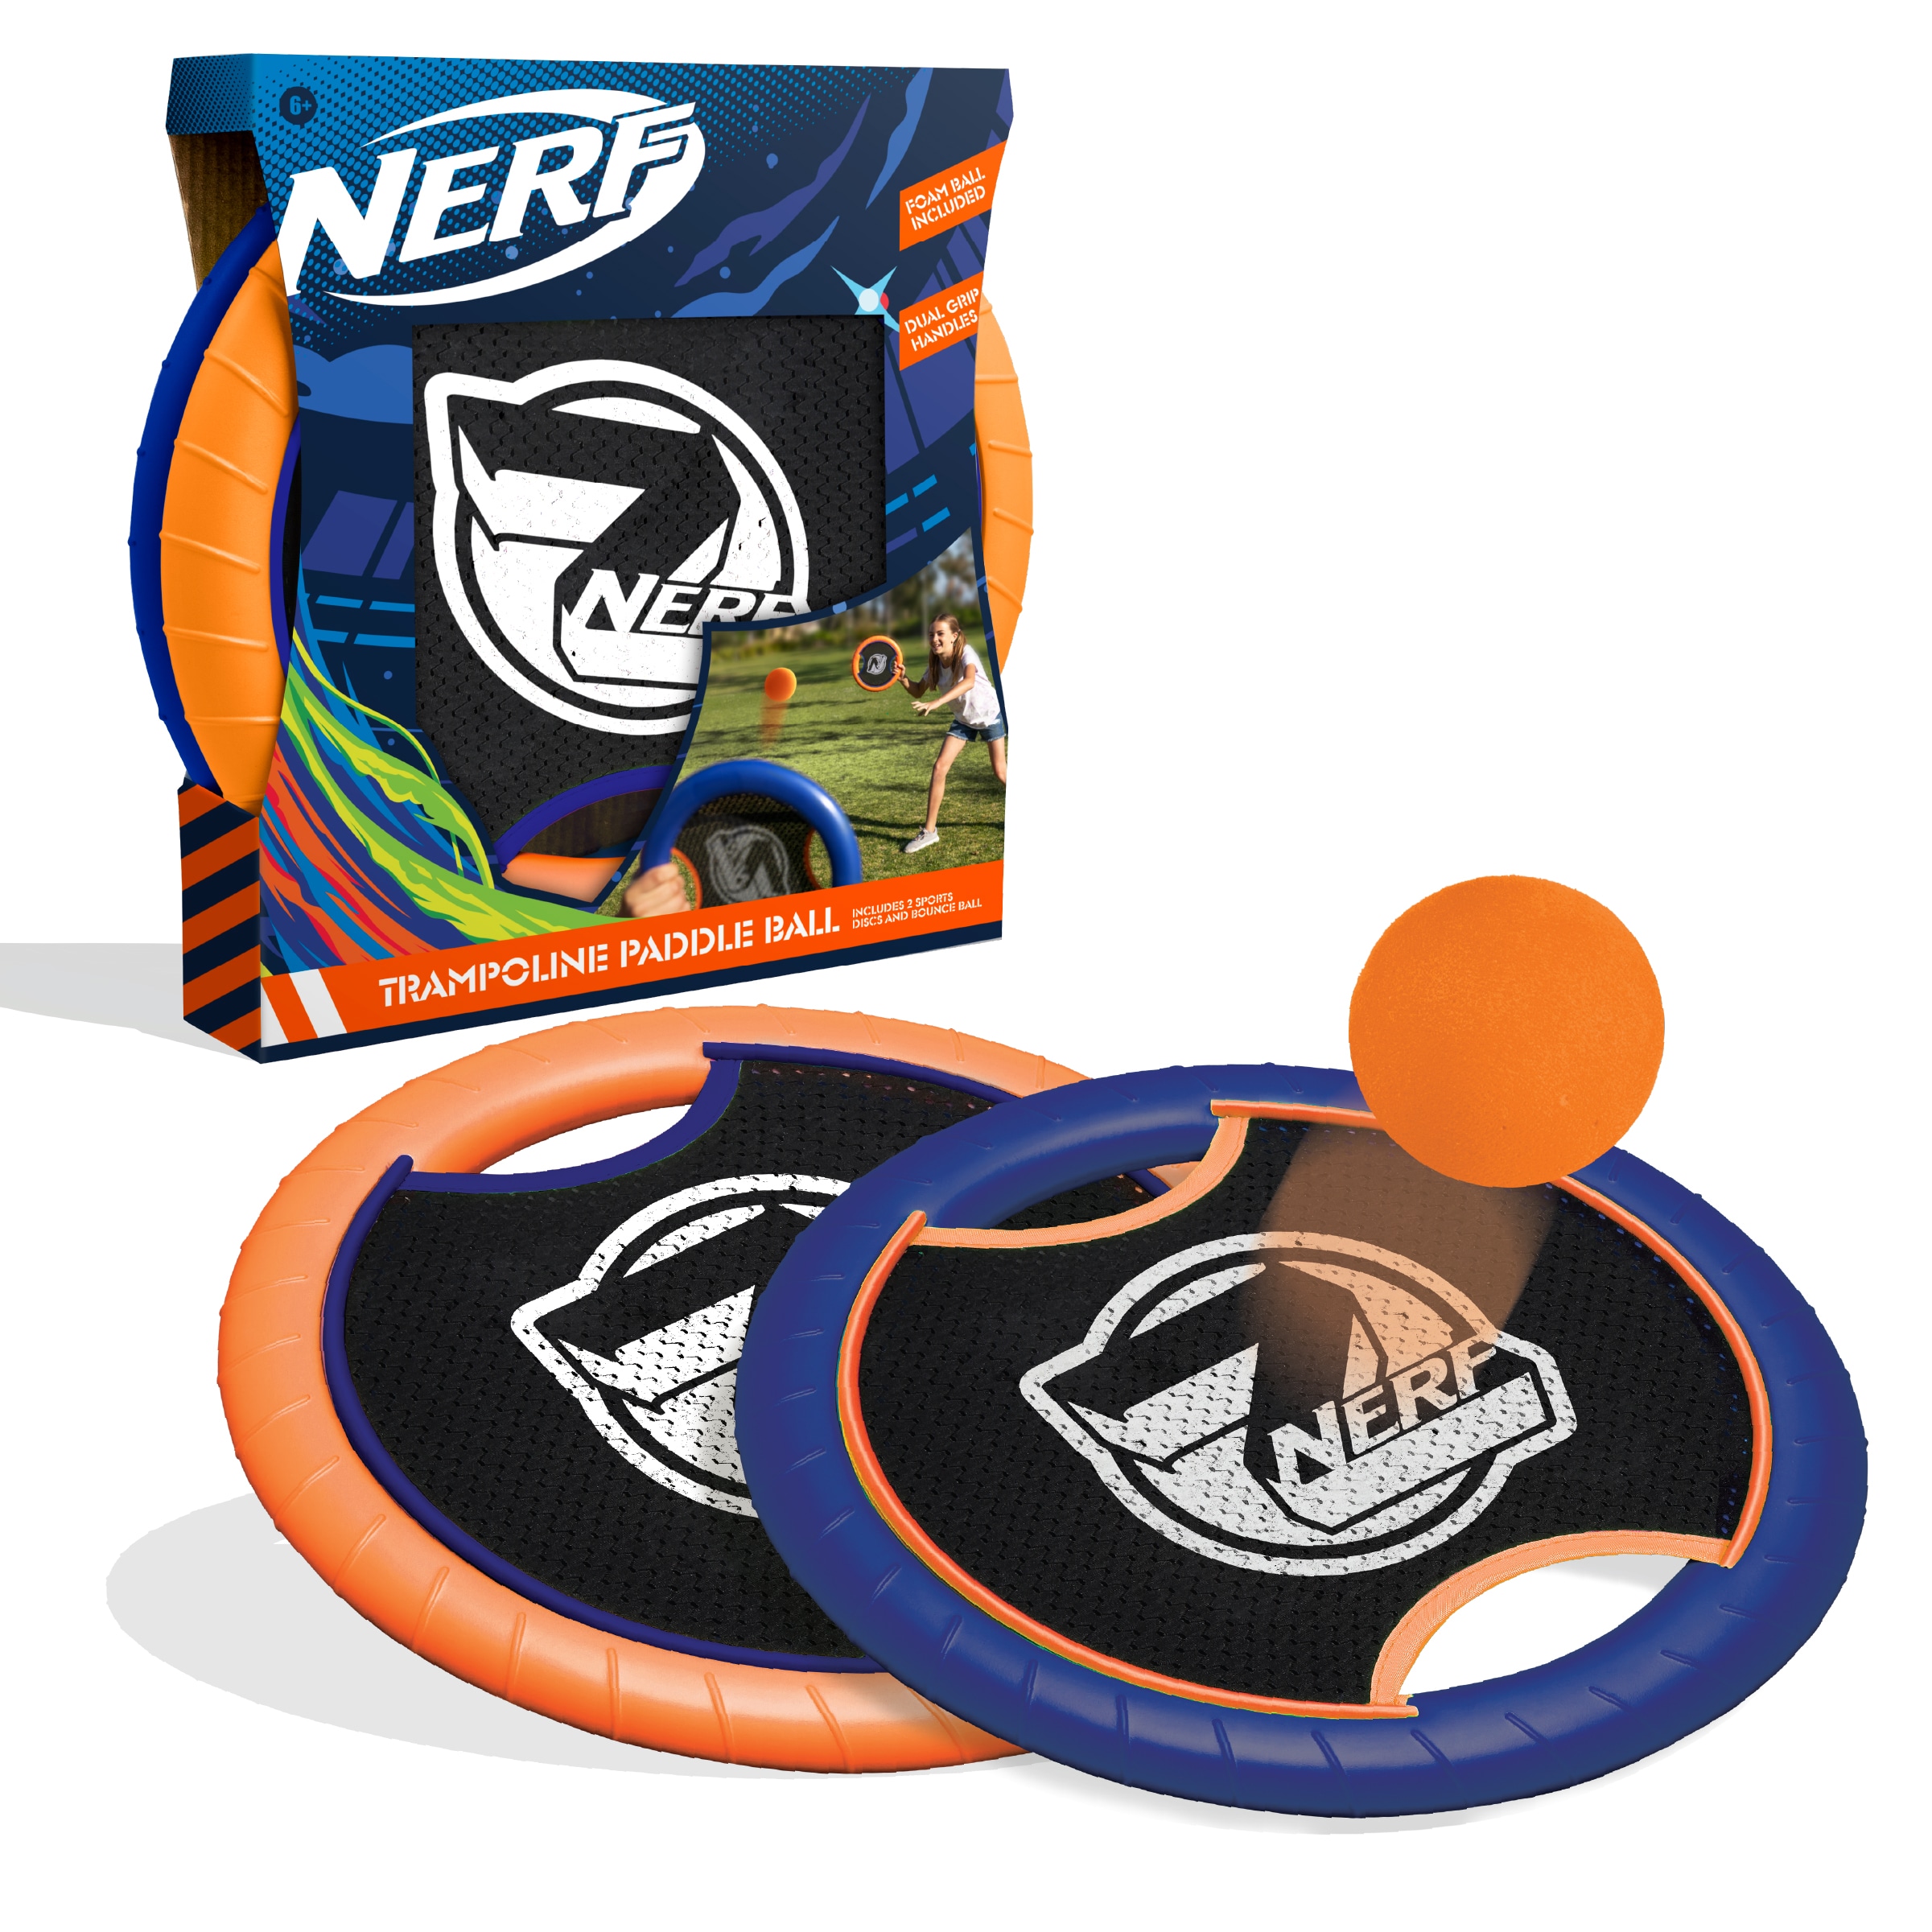 Nerf Game Badminton Set Jumbo - Outdoor Party Game for All Ages - Large  Rackets, Portable & Fun - Perfect for Travel, Beach, Picnics & Tournaments  in the Party Games department at